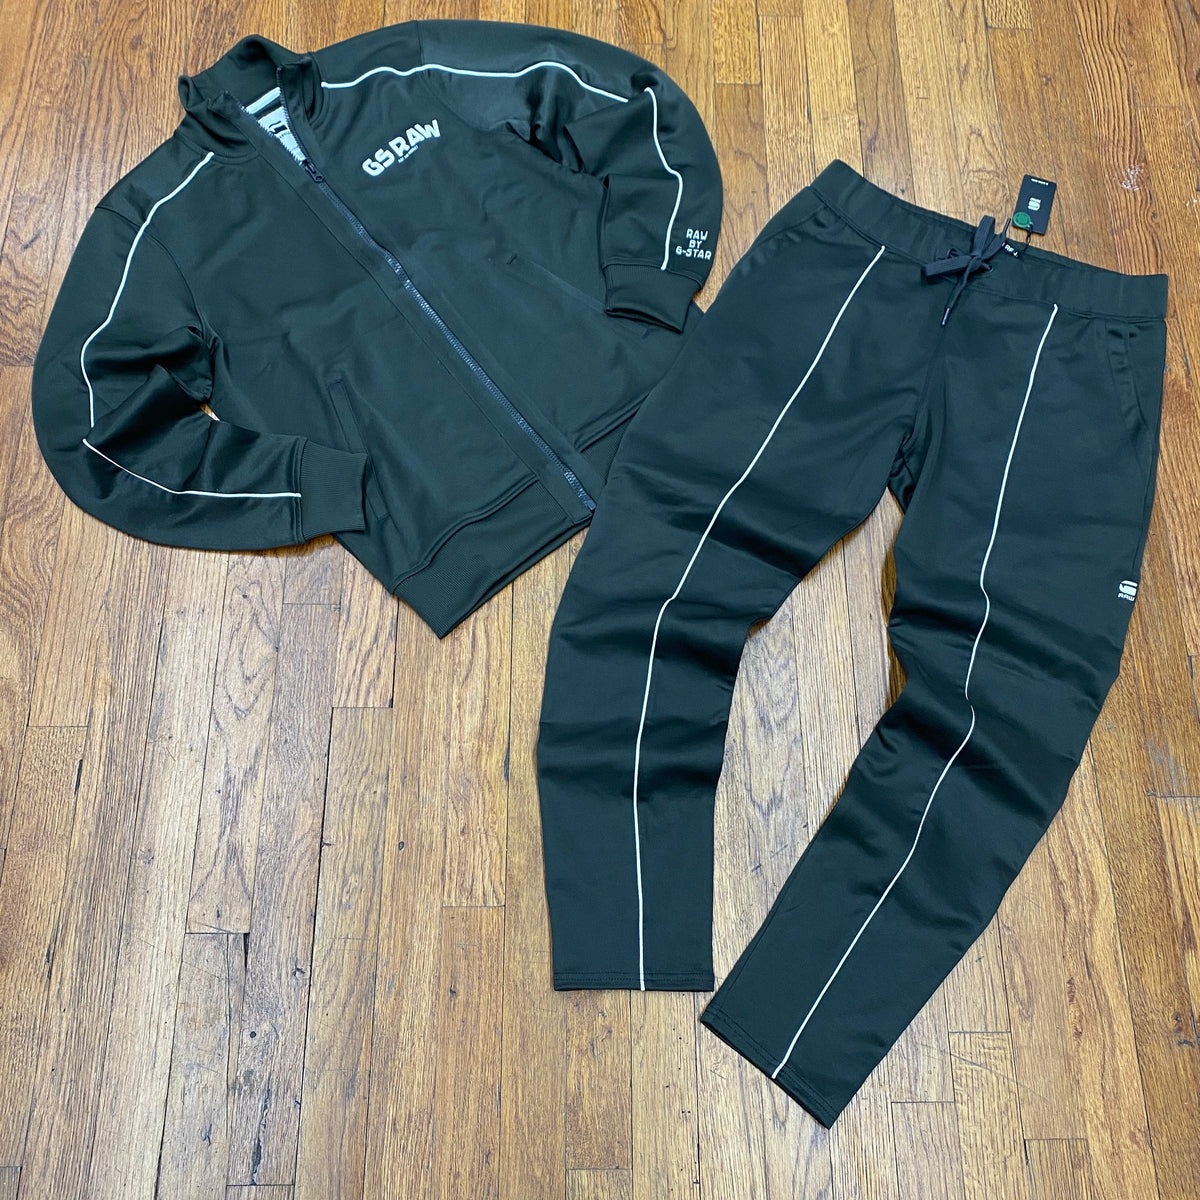 g star sweat suits